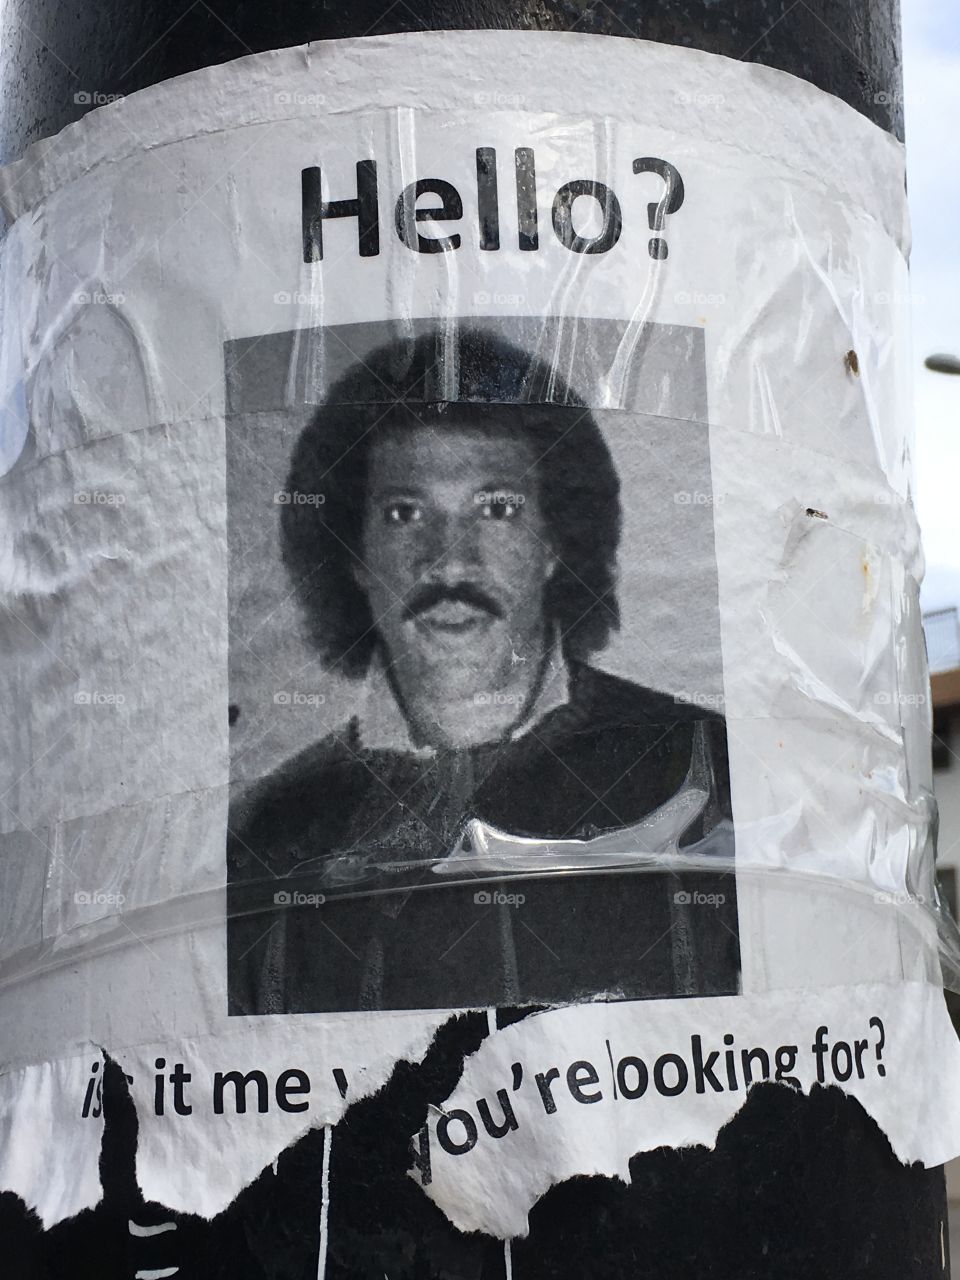 Ad in a pole - Boulder. CO